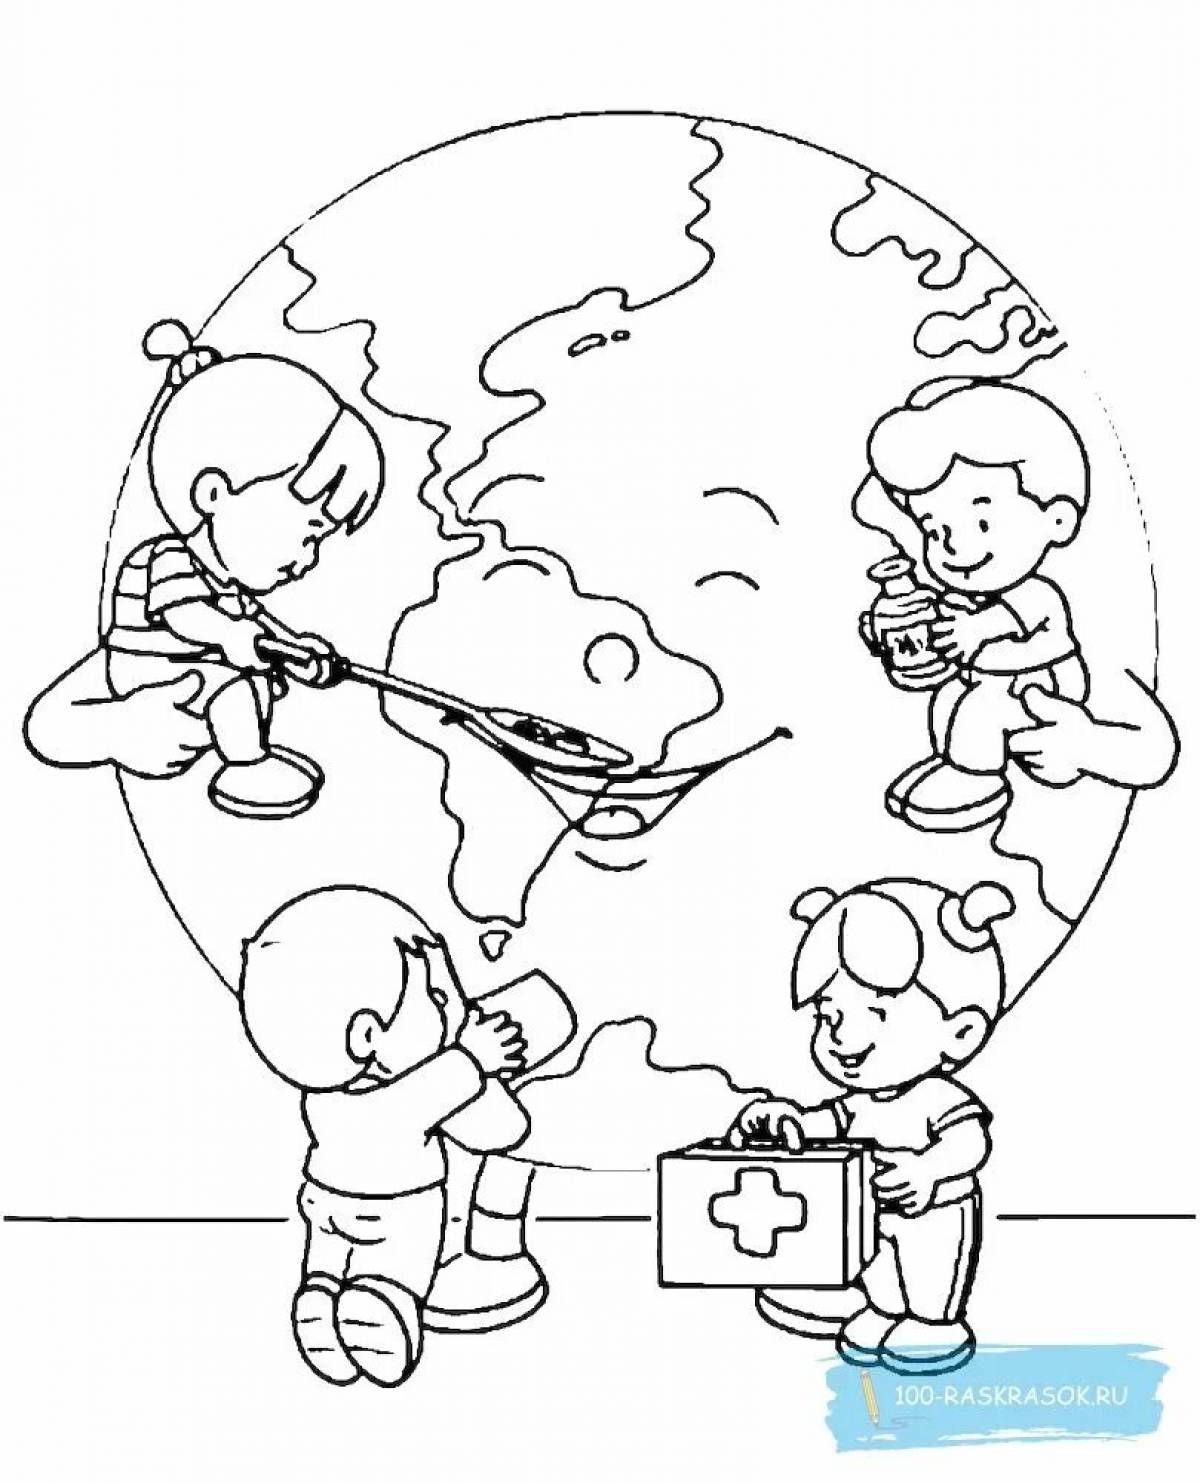 Fun care for nature coloring page with ecology theme